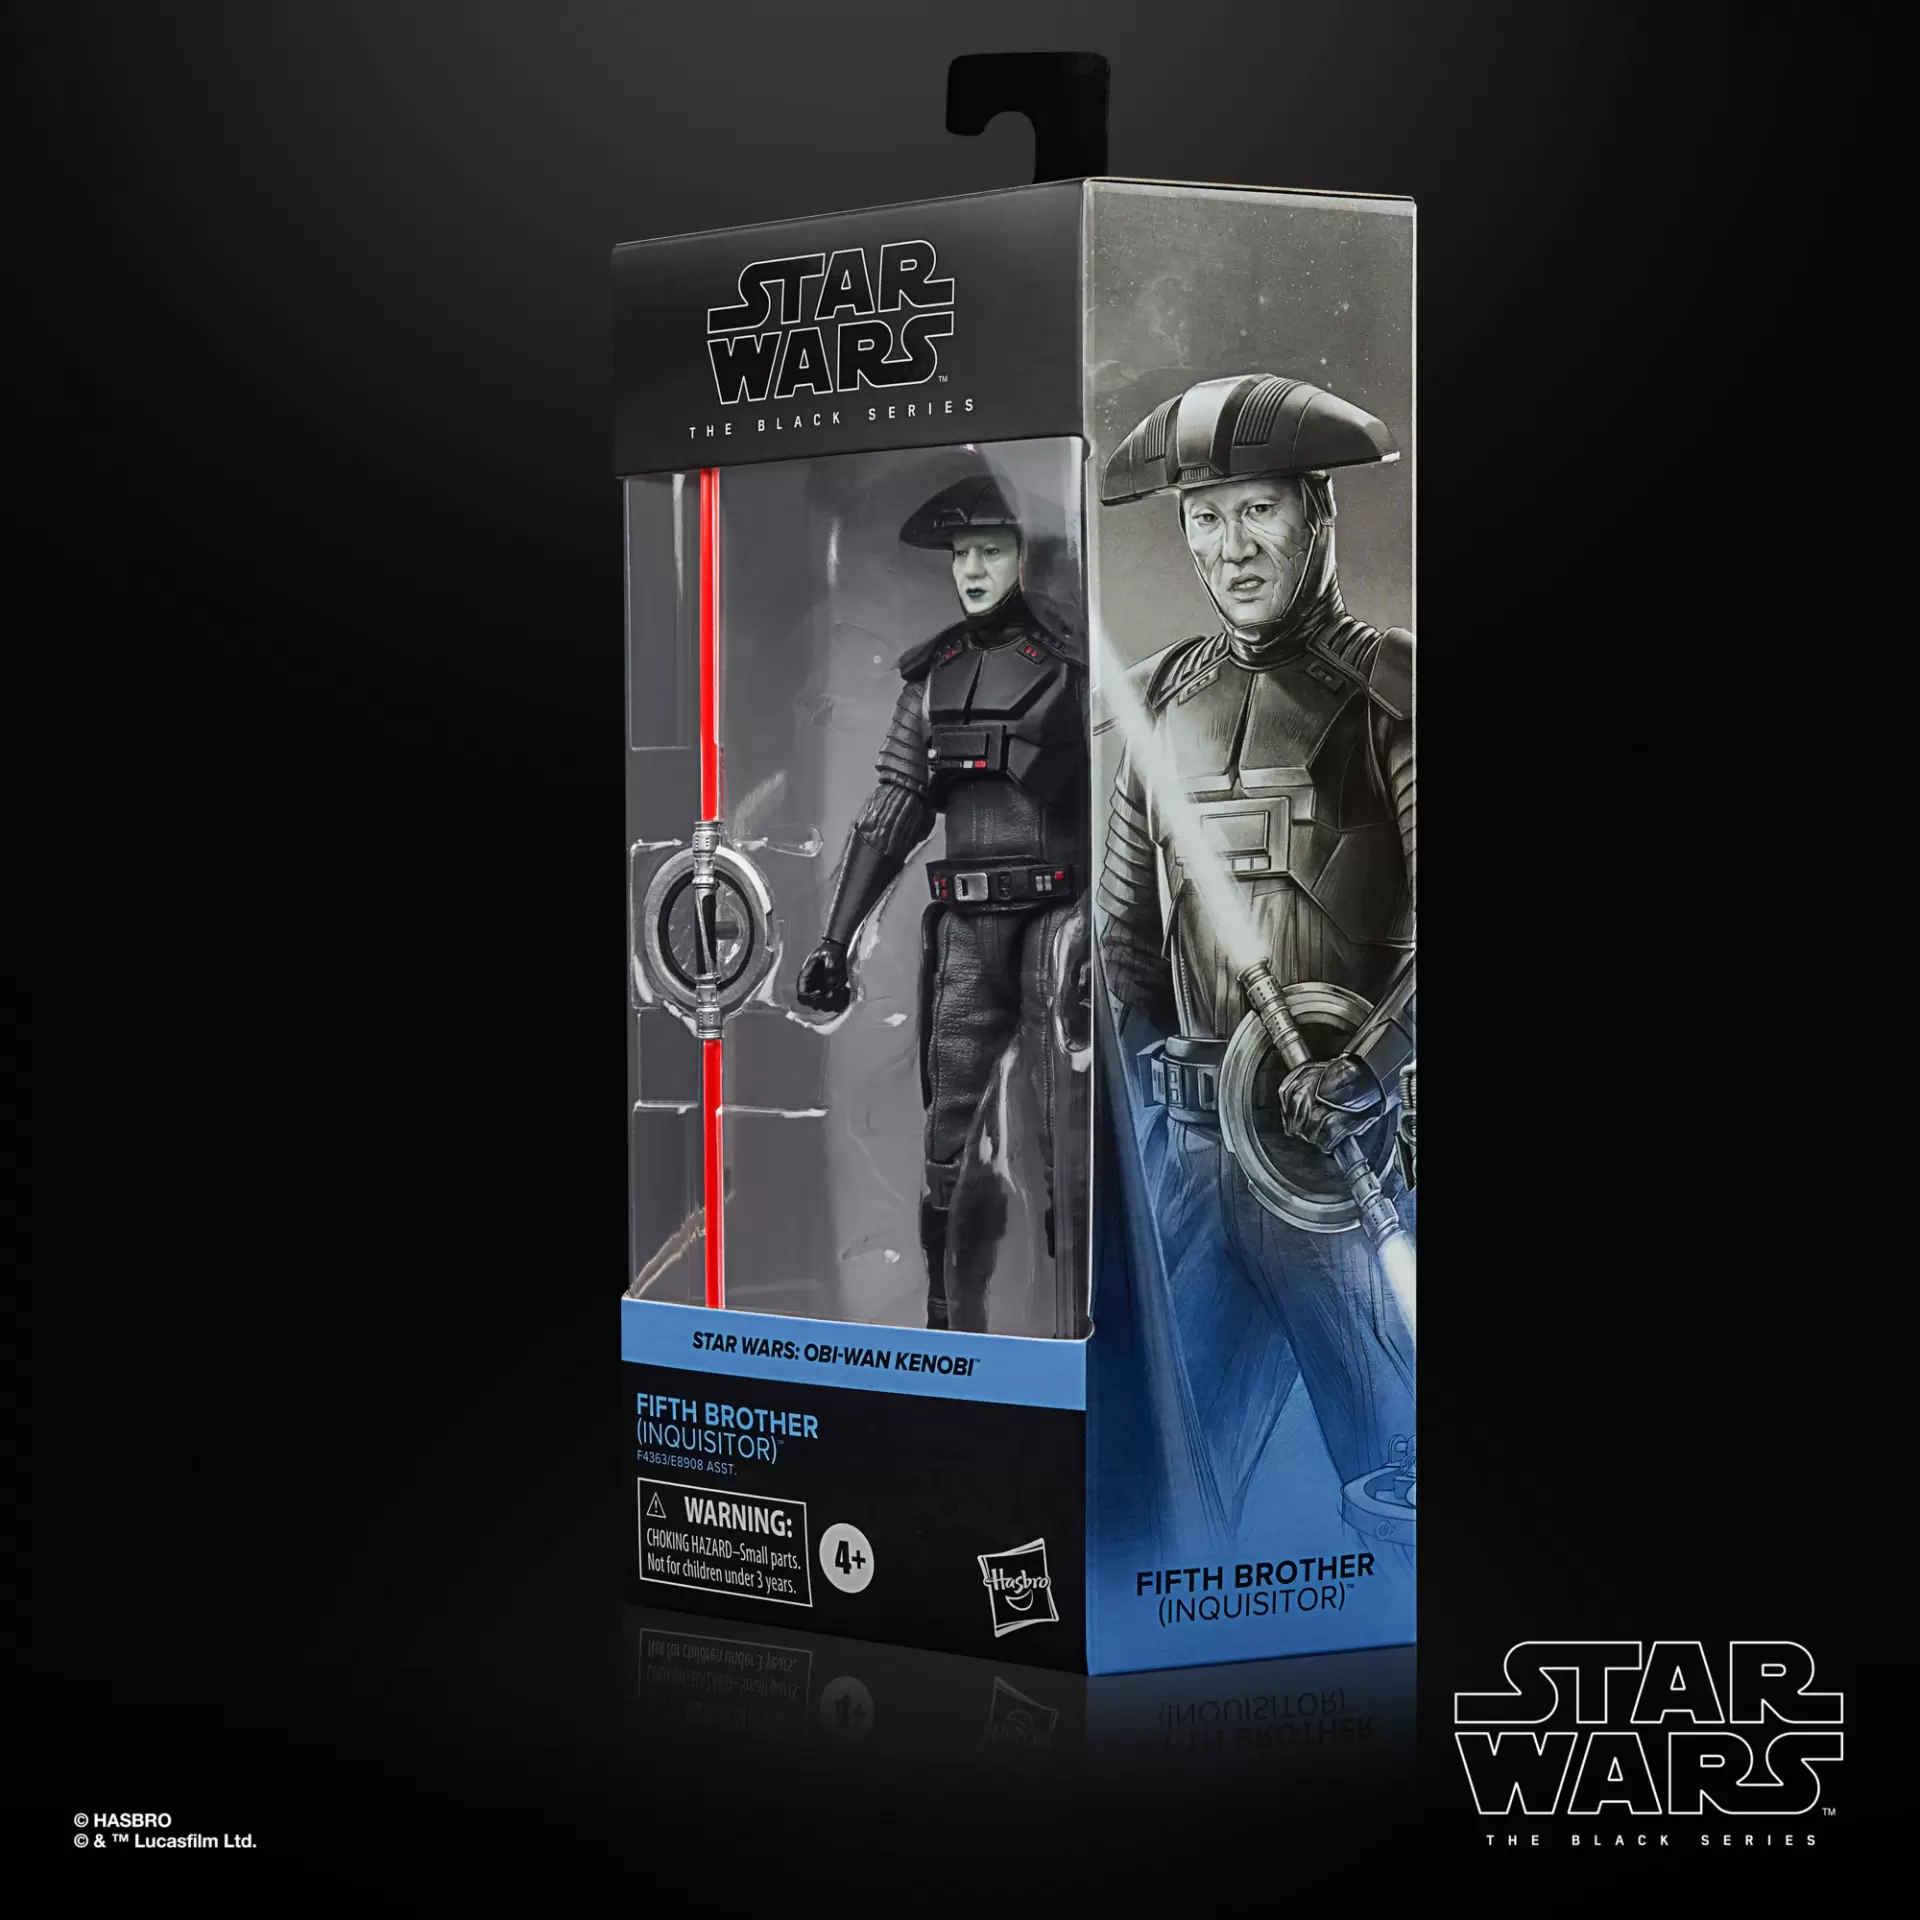 Star wars the black series fifth brother inquisitor jawascave 2